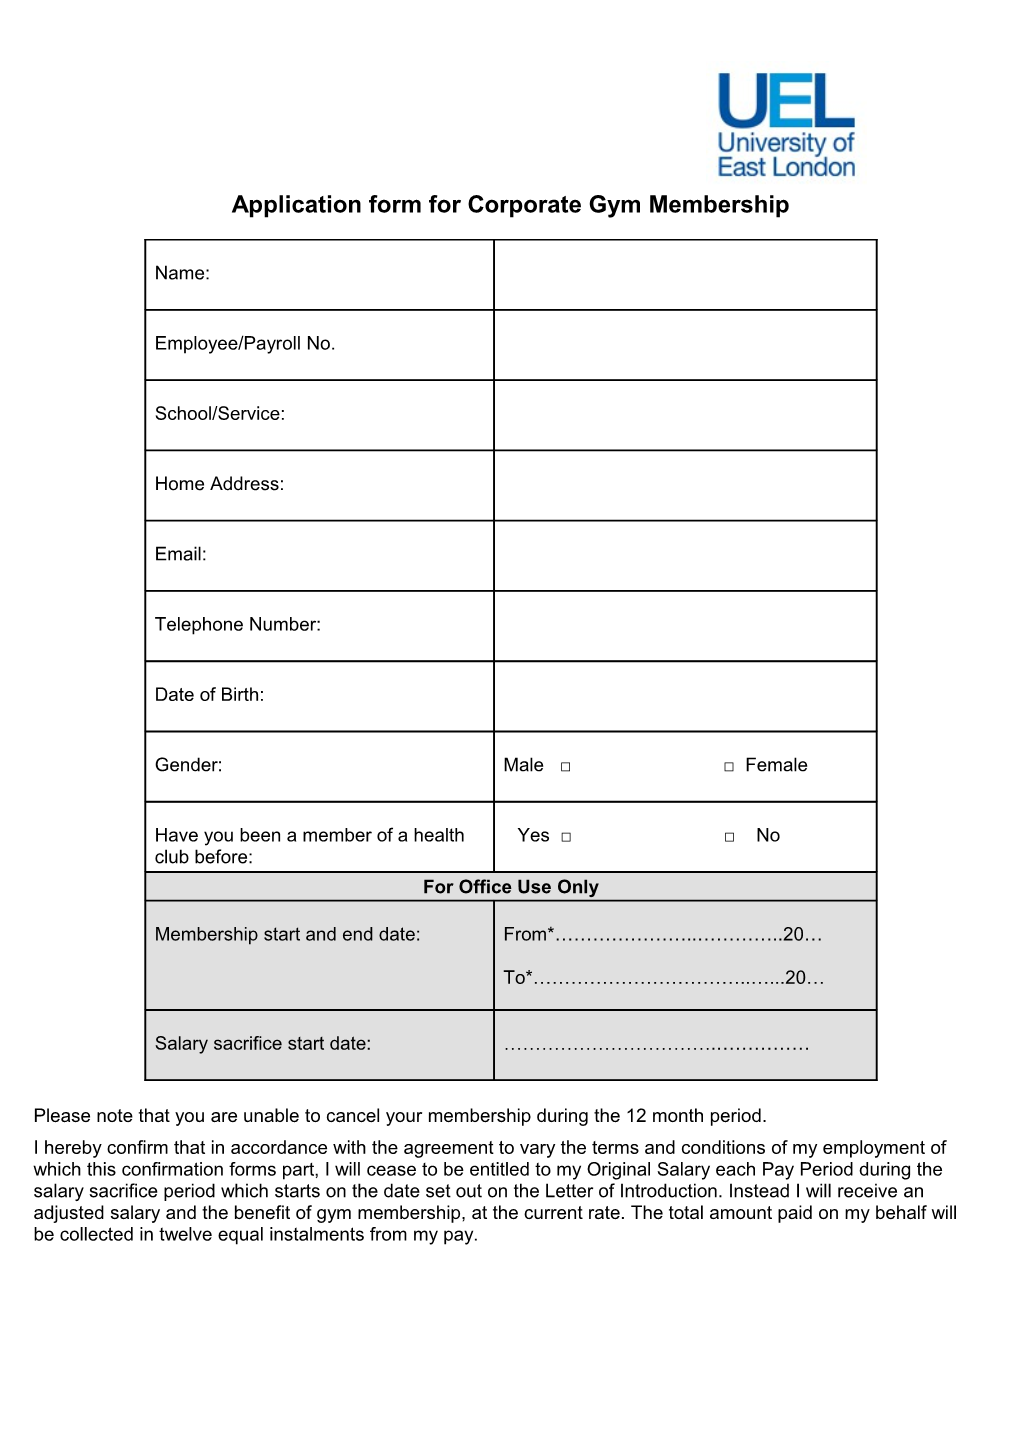 Application Form for Newham Leisure Centre Membership